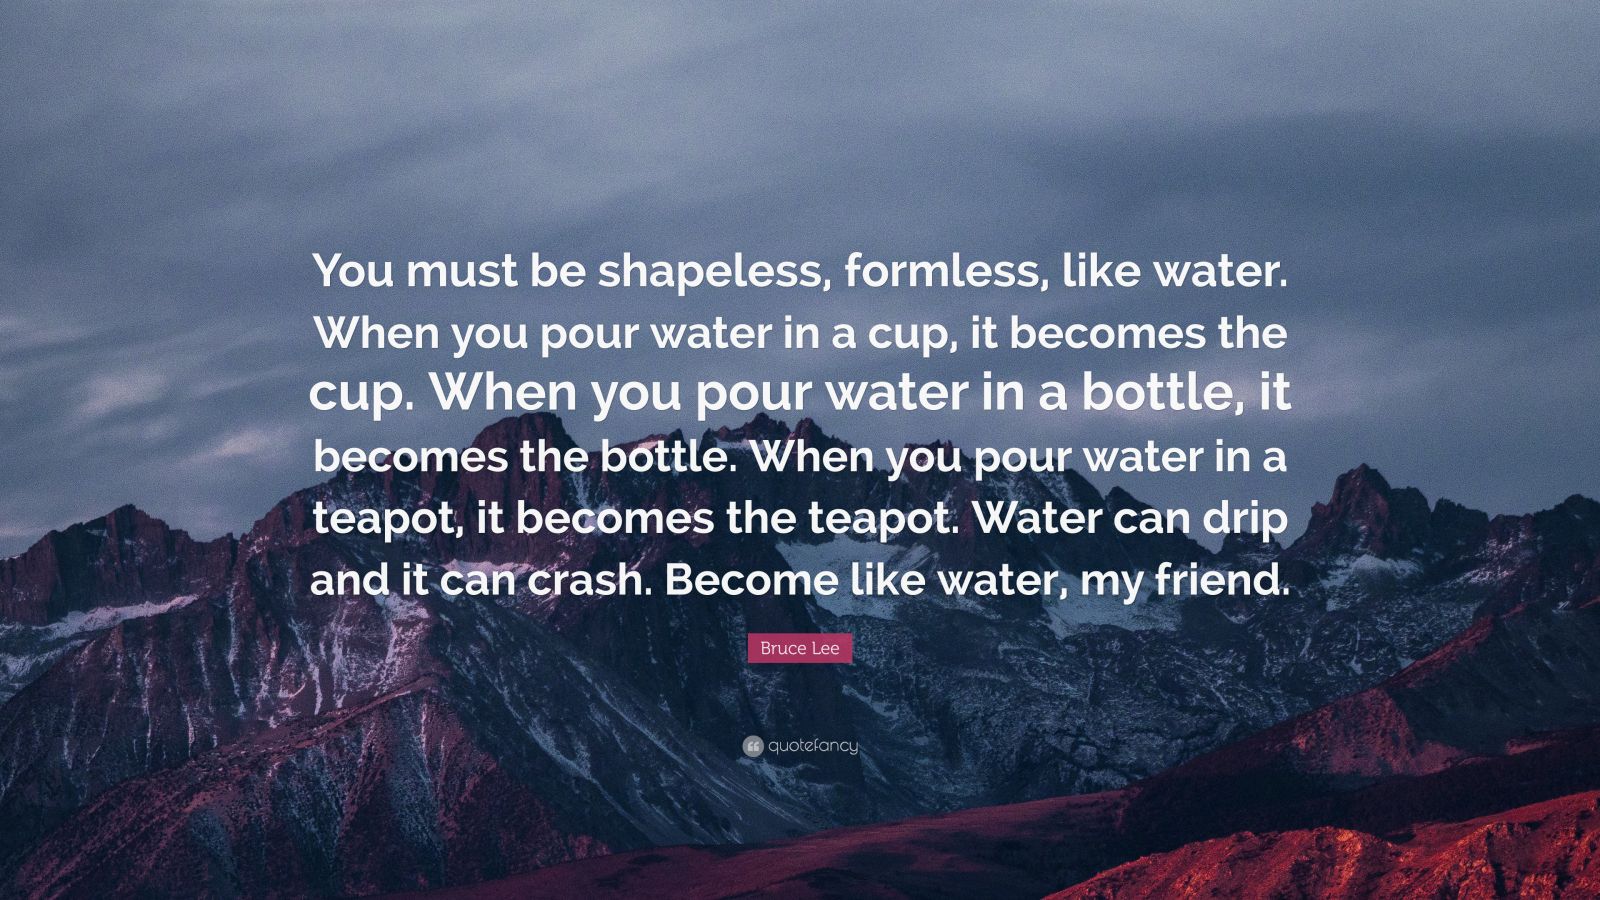 2004523 Bruce Lee Quote You must be shapeless formless like water When you